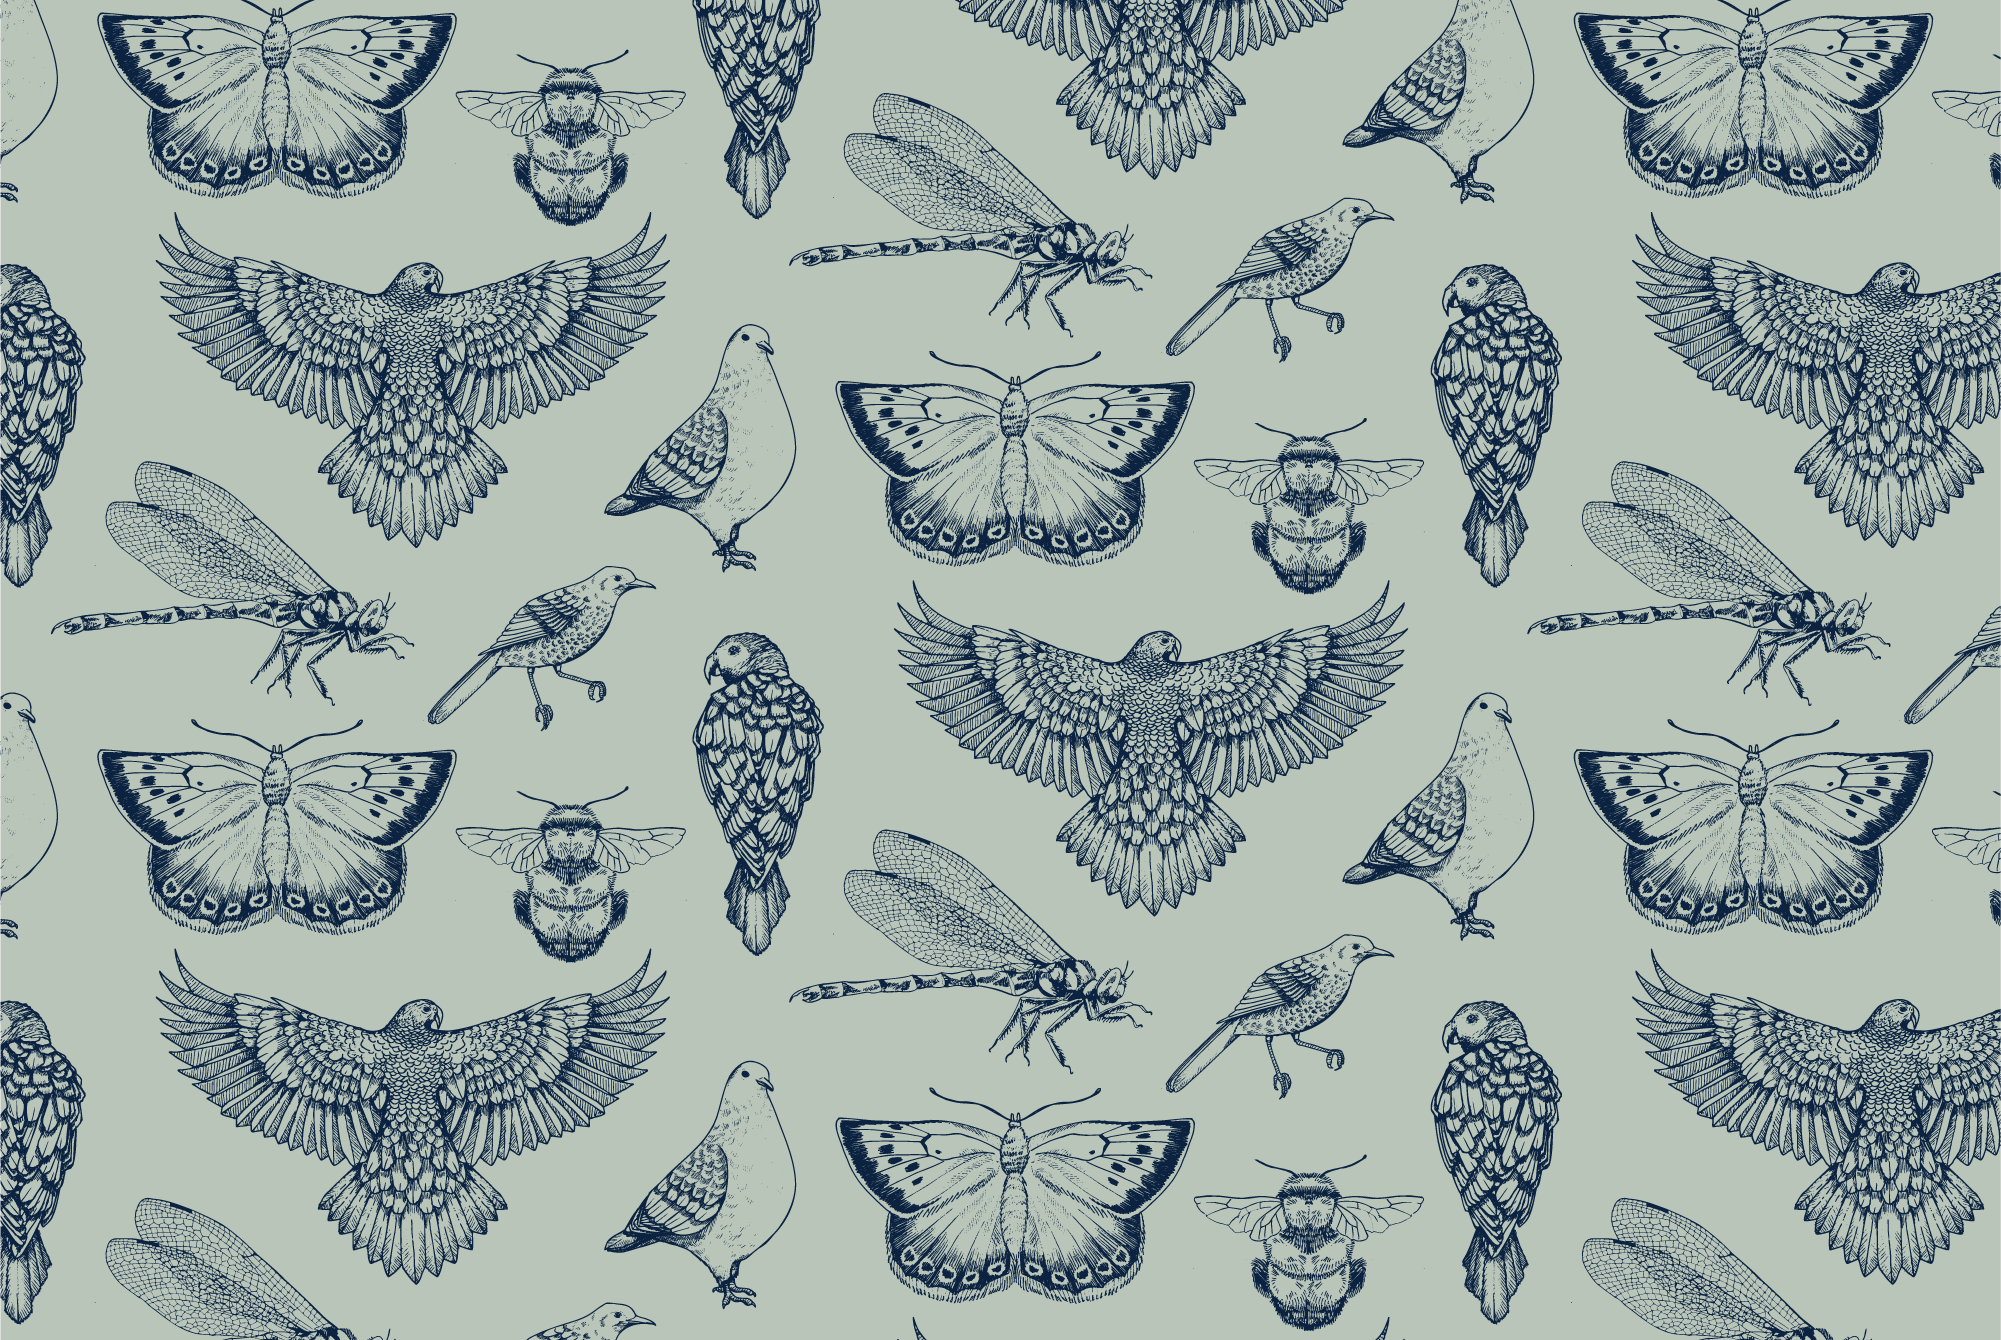 Pattern design by Sophie Leven of seven endangered bird and insect species. Digital illustrations consist of dark blue linework on a sage green background.